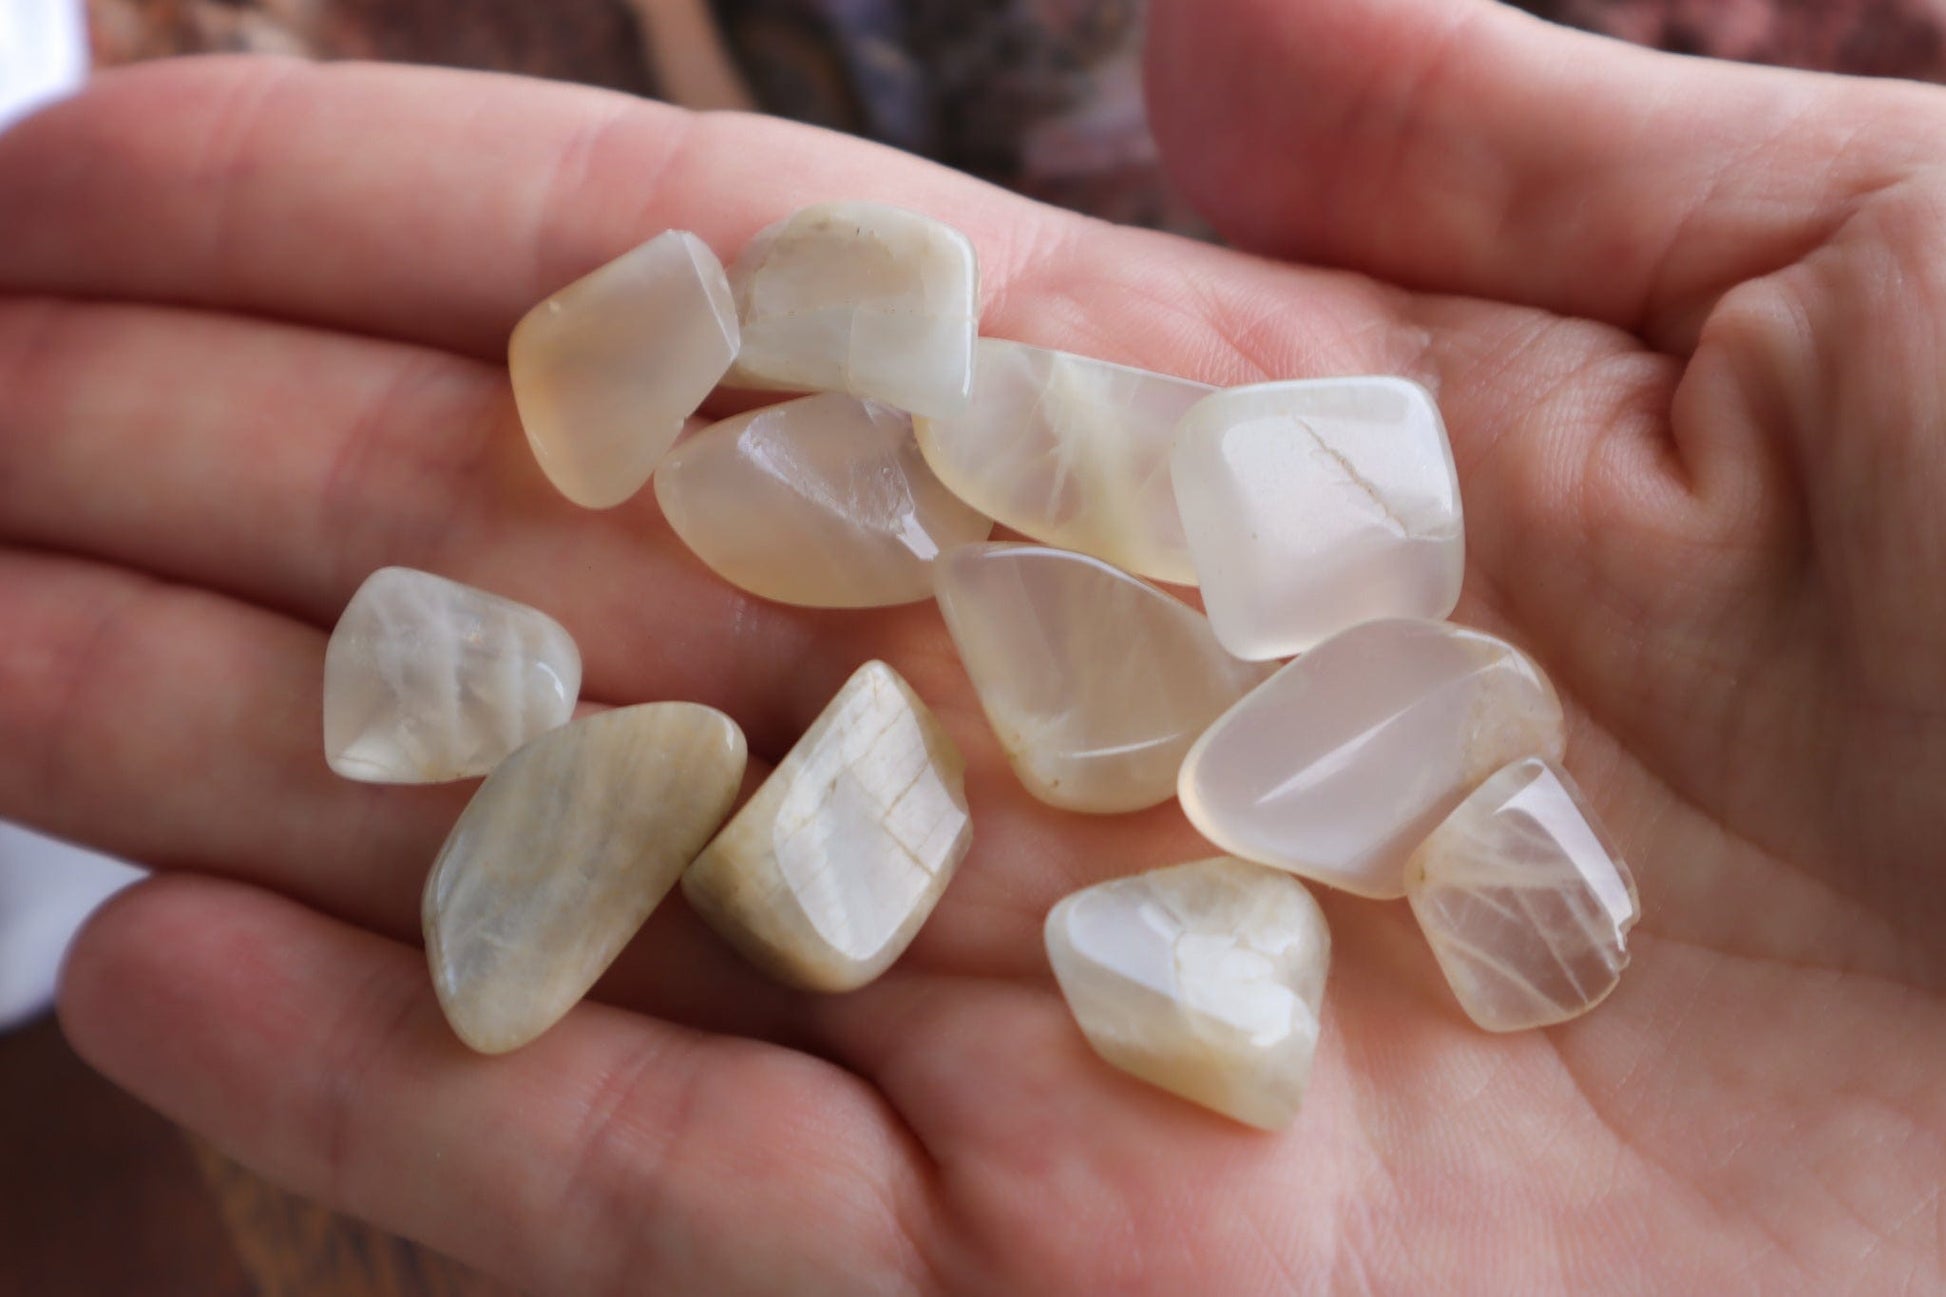 Moonstone Chips - Emotional Support/Strength Crystal Chips Tali & Loz